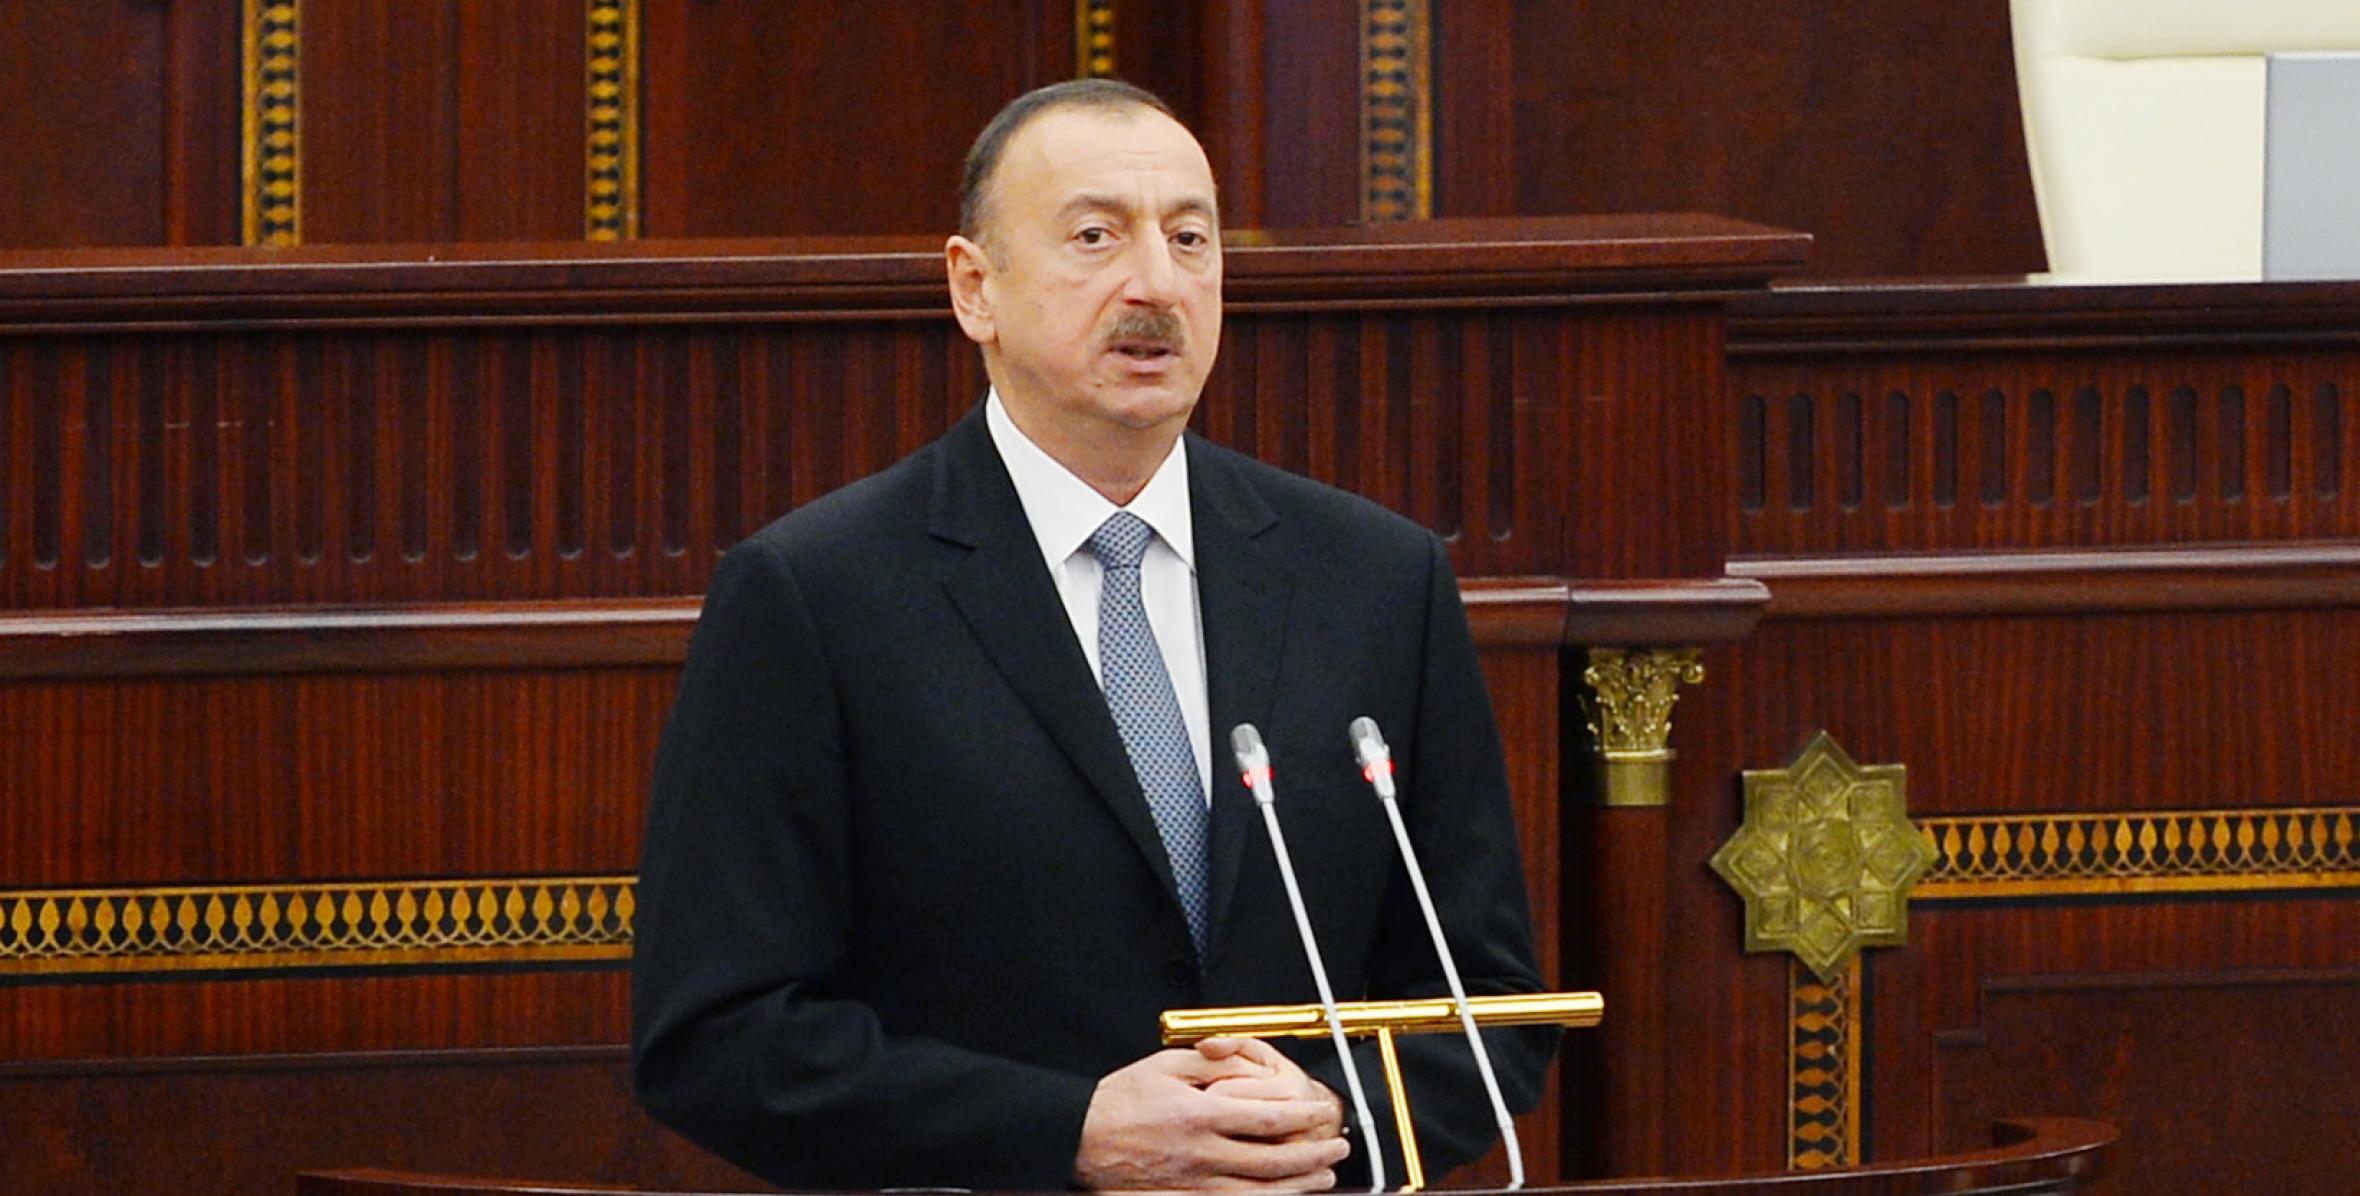 Speech by Ilham Aliyev at the first session of the Azerbaijani Parliament’s fifth convocation